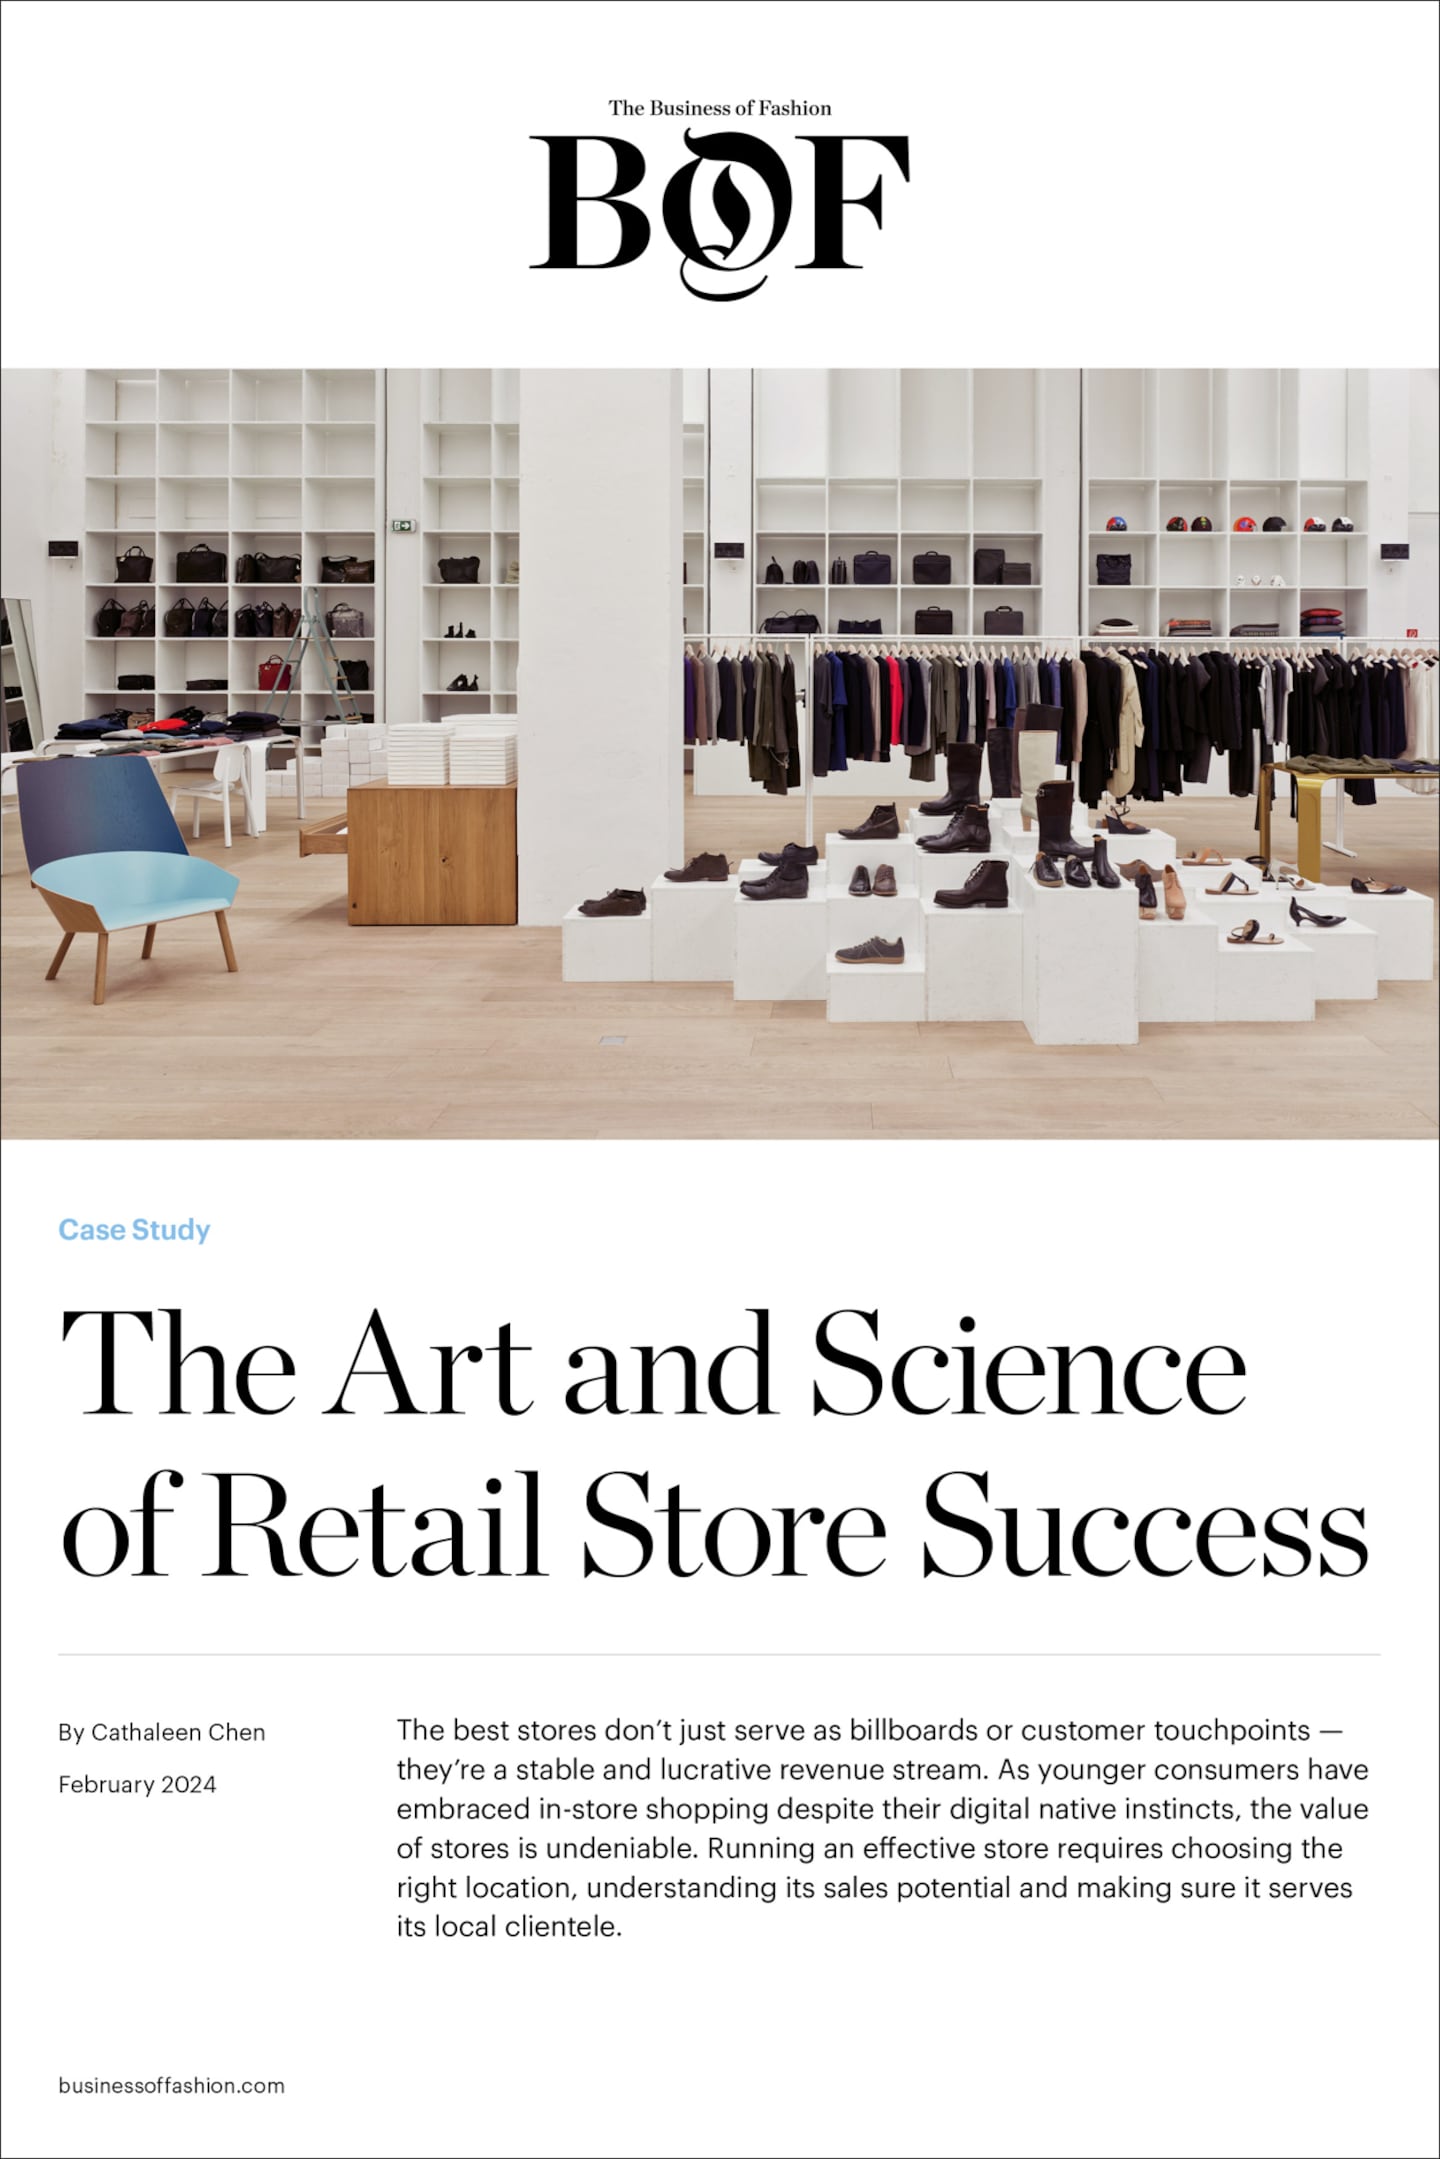 Introducing BoF's latest case study. The Art and Science of Retail Store Success.